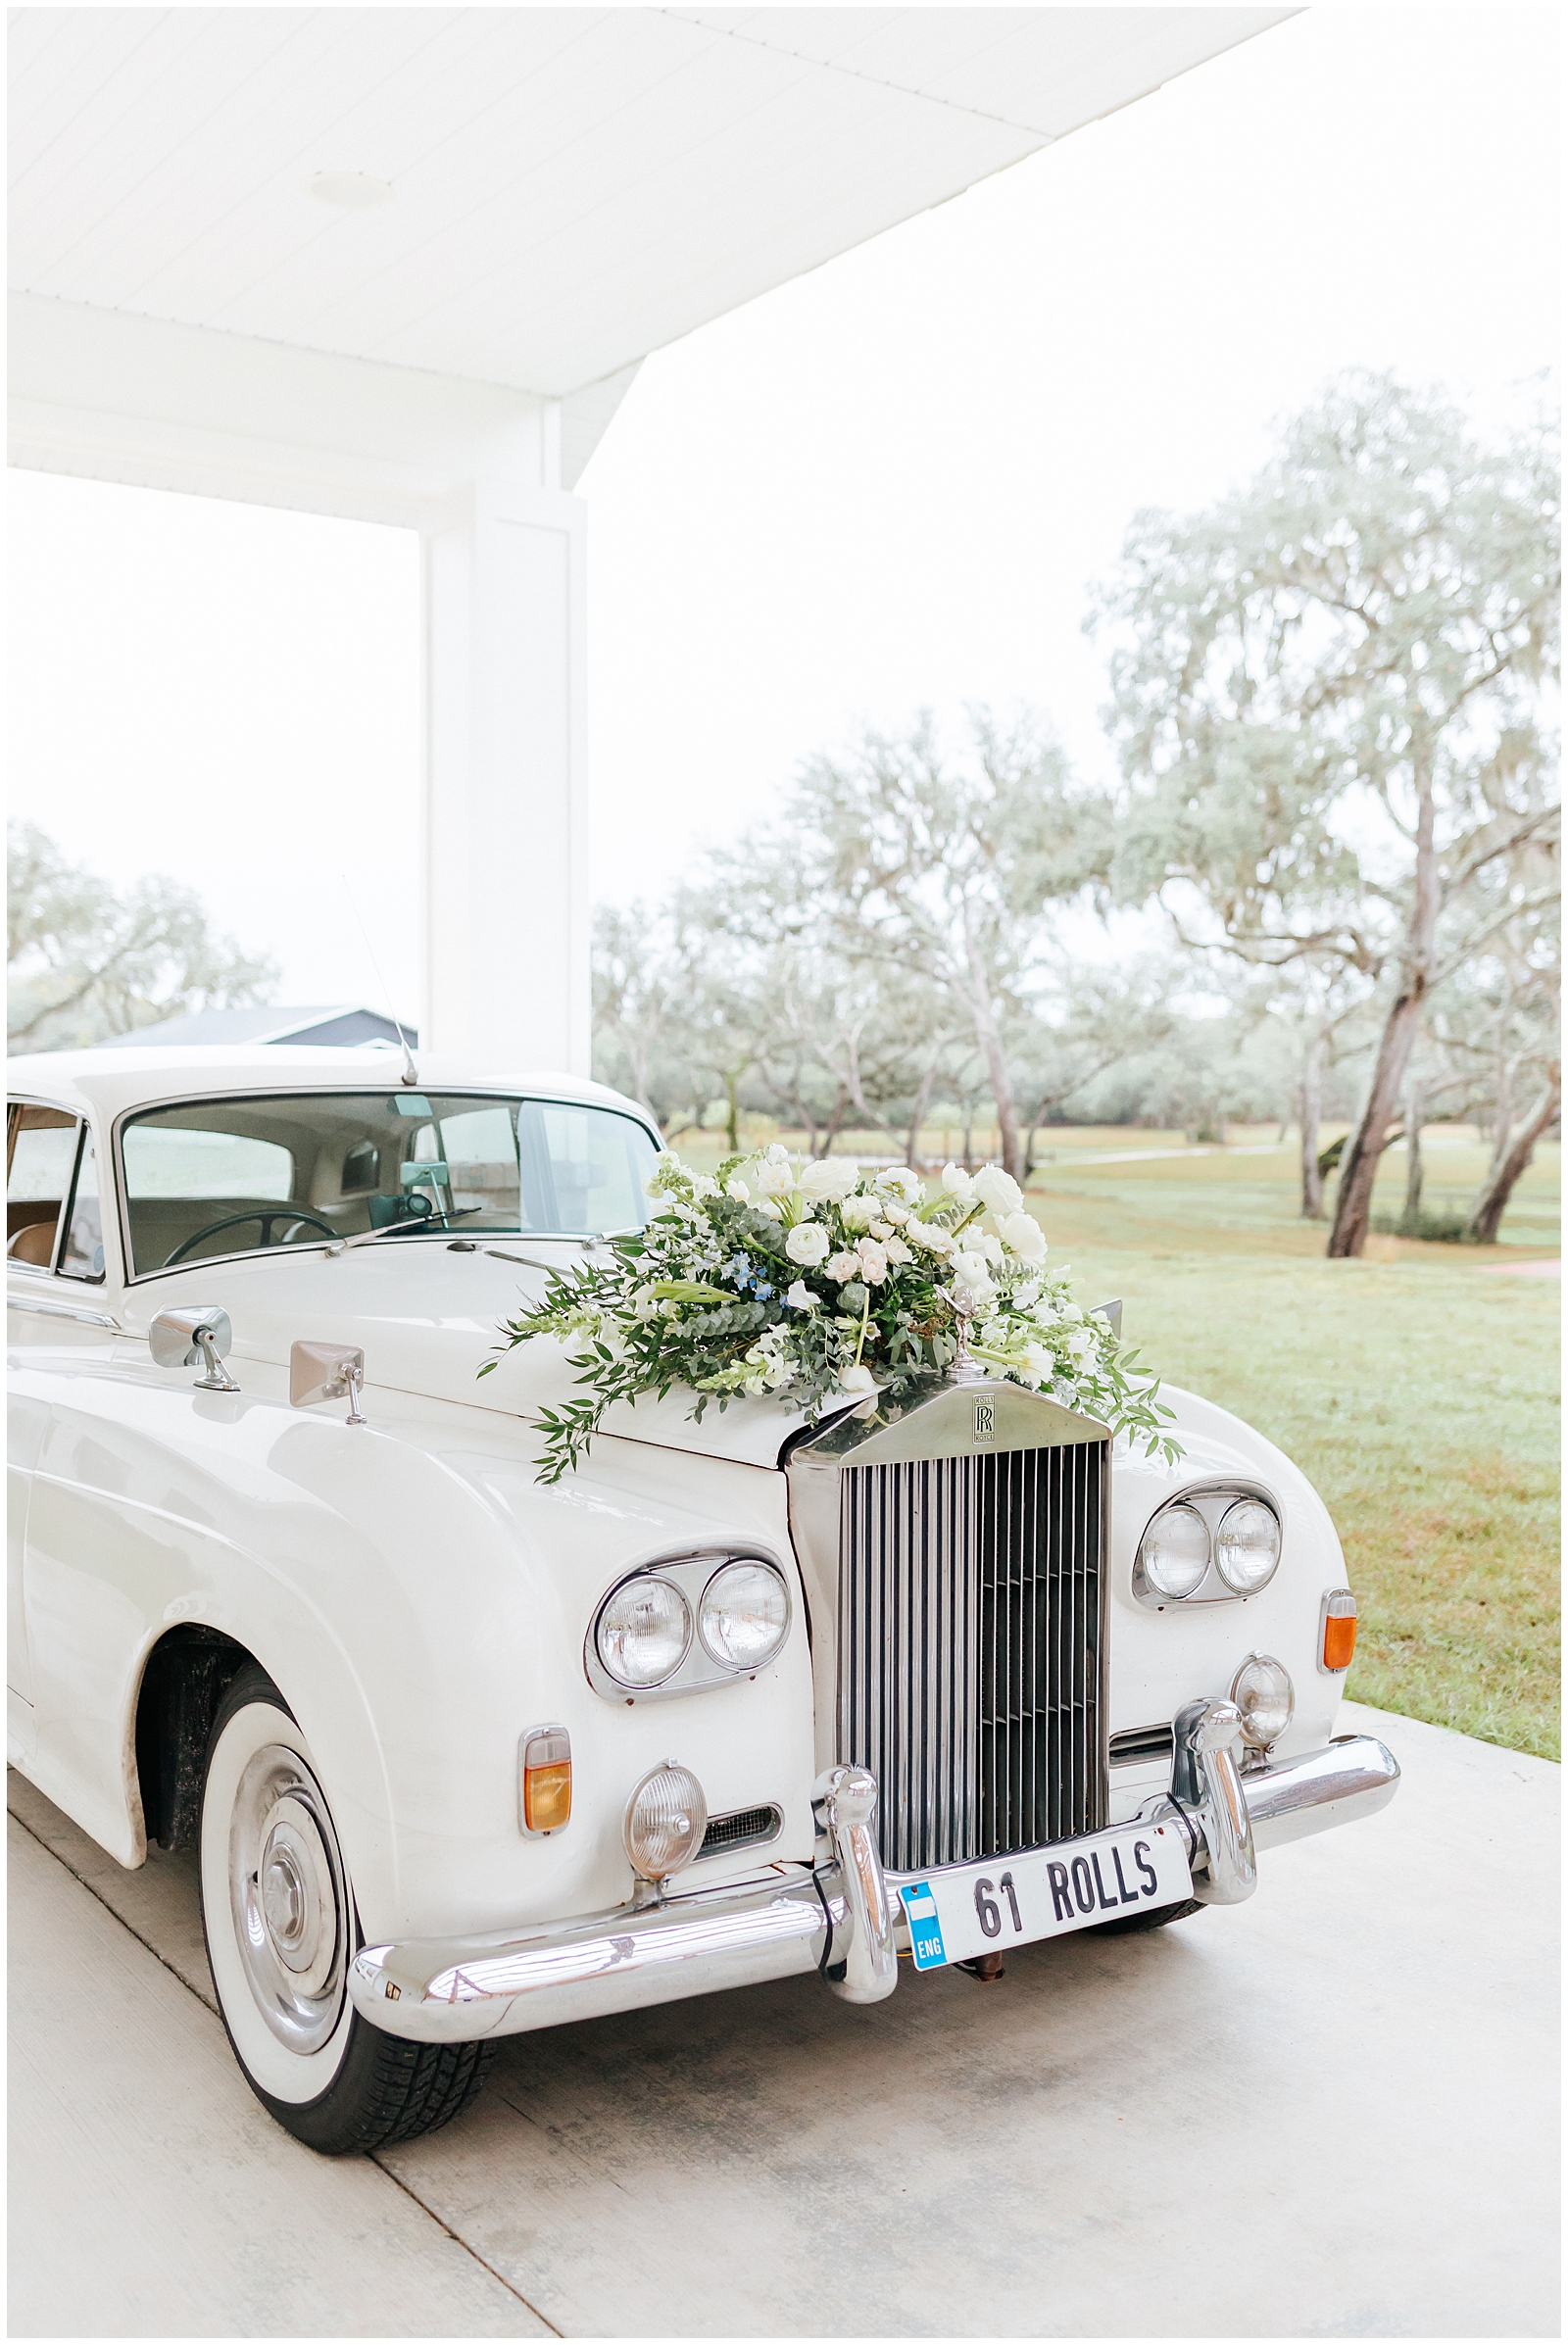 1961 Vintage Rolls Royce in White with Floral Installation at Wedding - Grand Exit Car